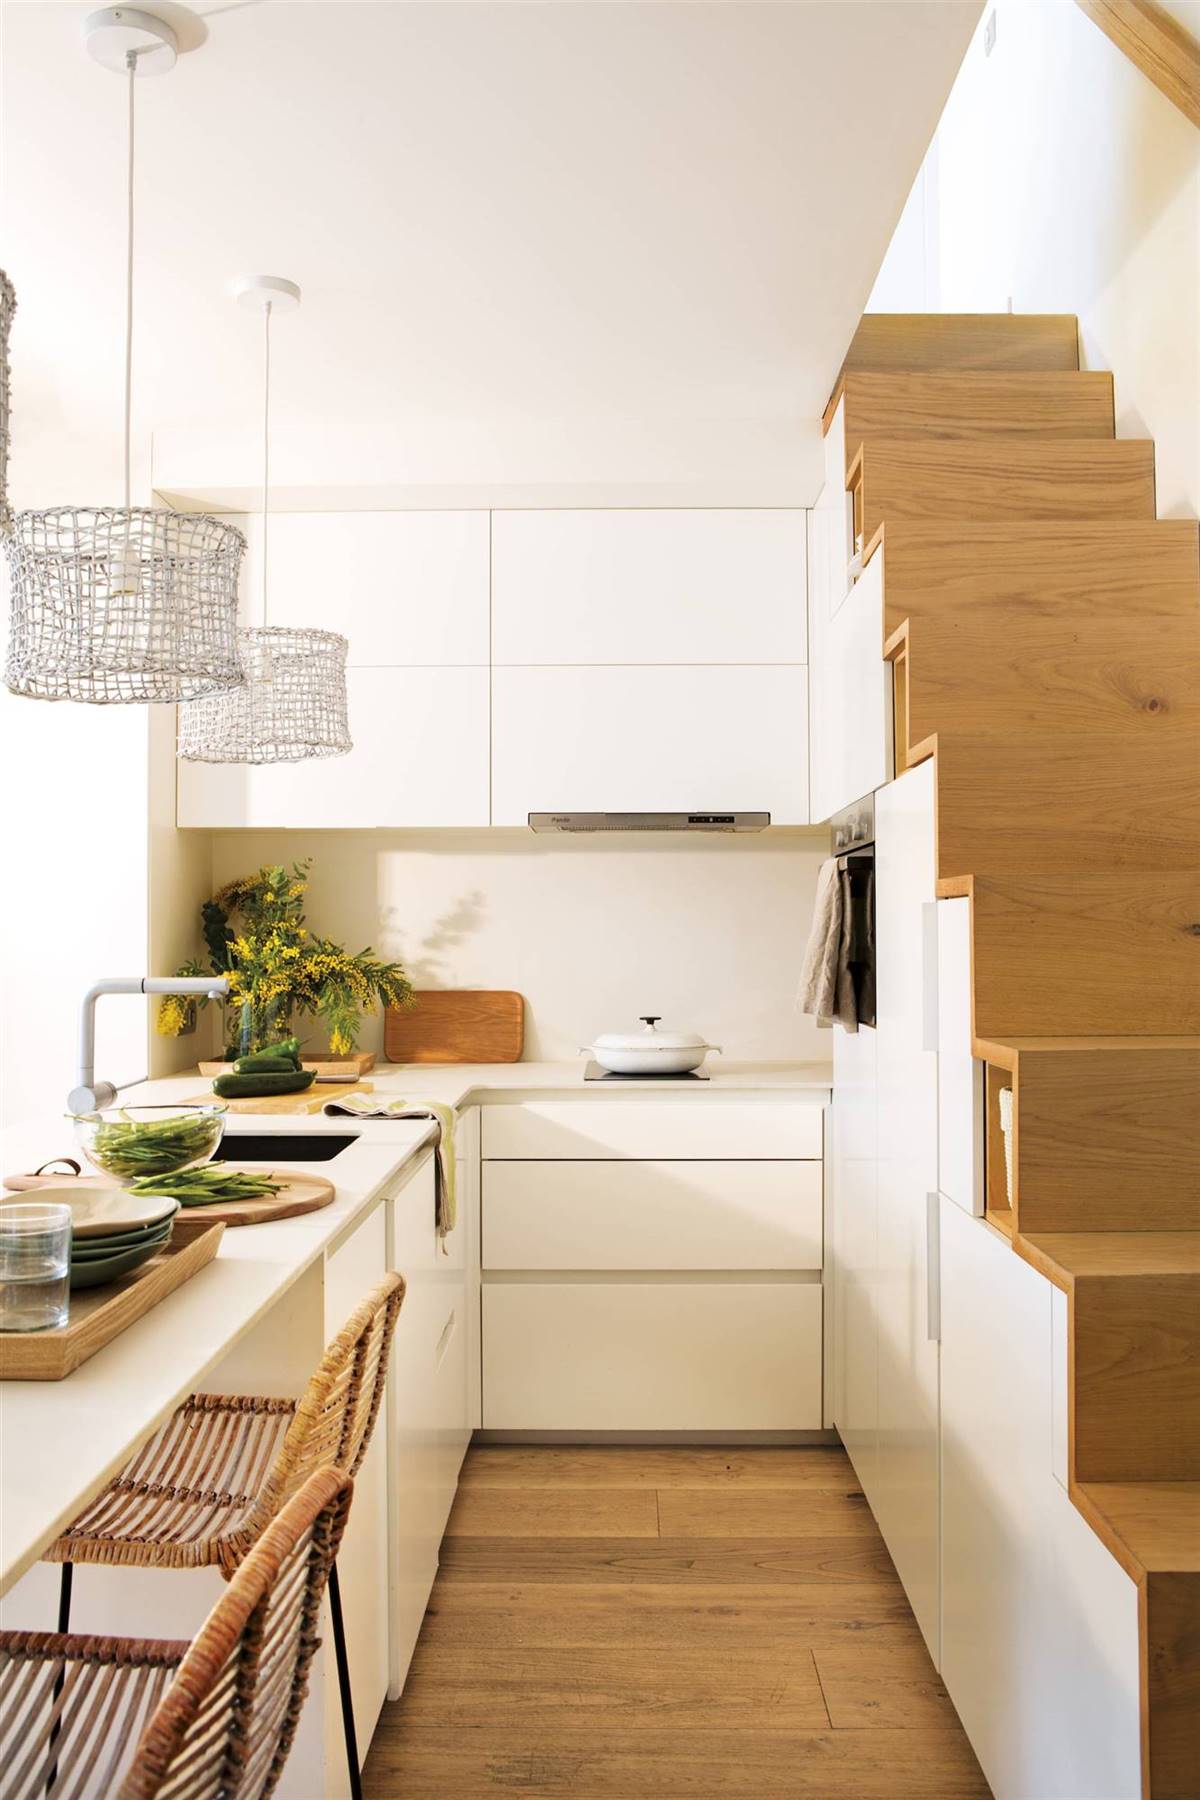 A KITCHEN UNDER THE STAIRS